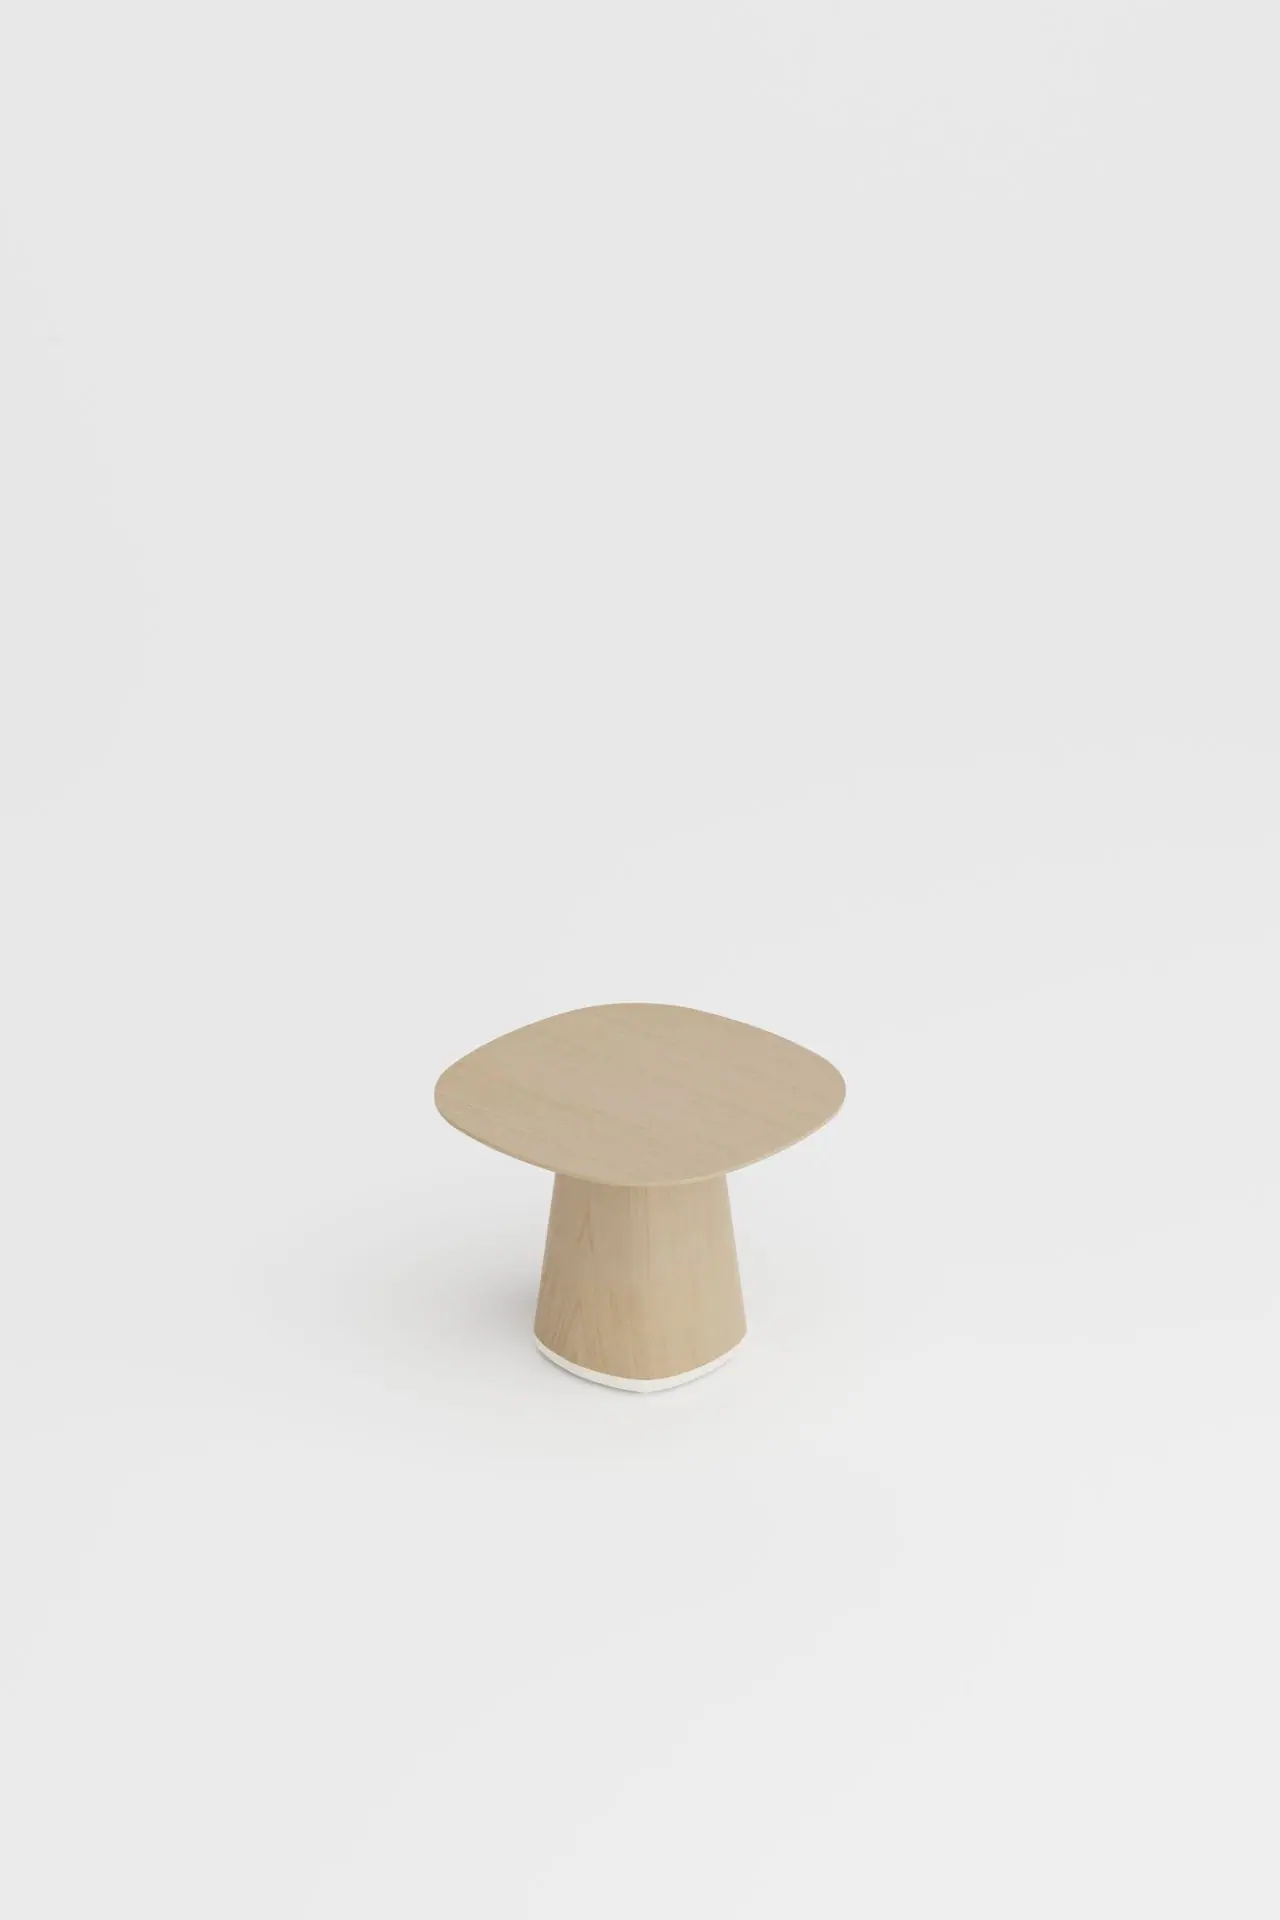 conic_table_verges_07